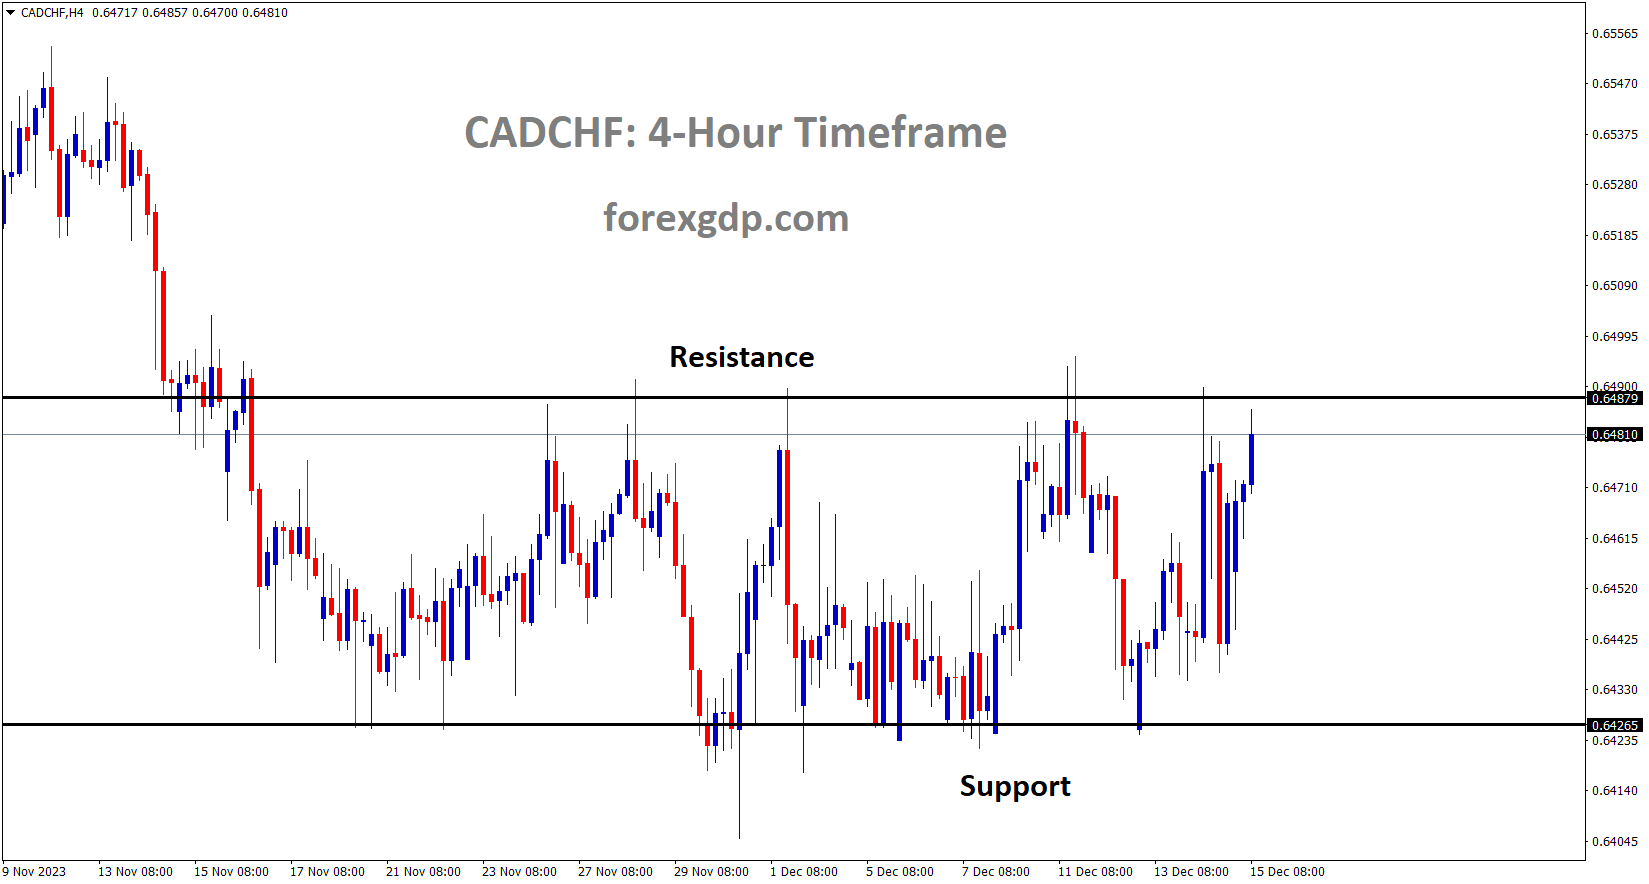 CADCHF is moving in the Box pattern and the market has reached the resistance area of the pattern